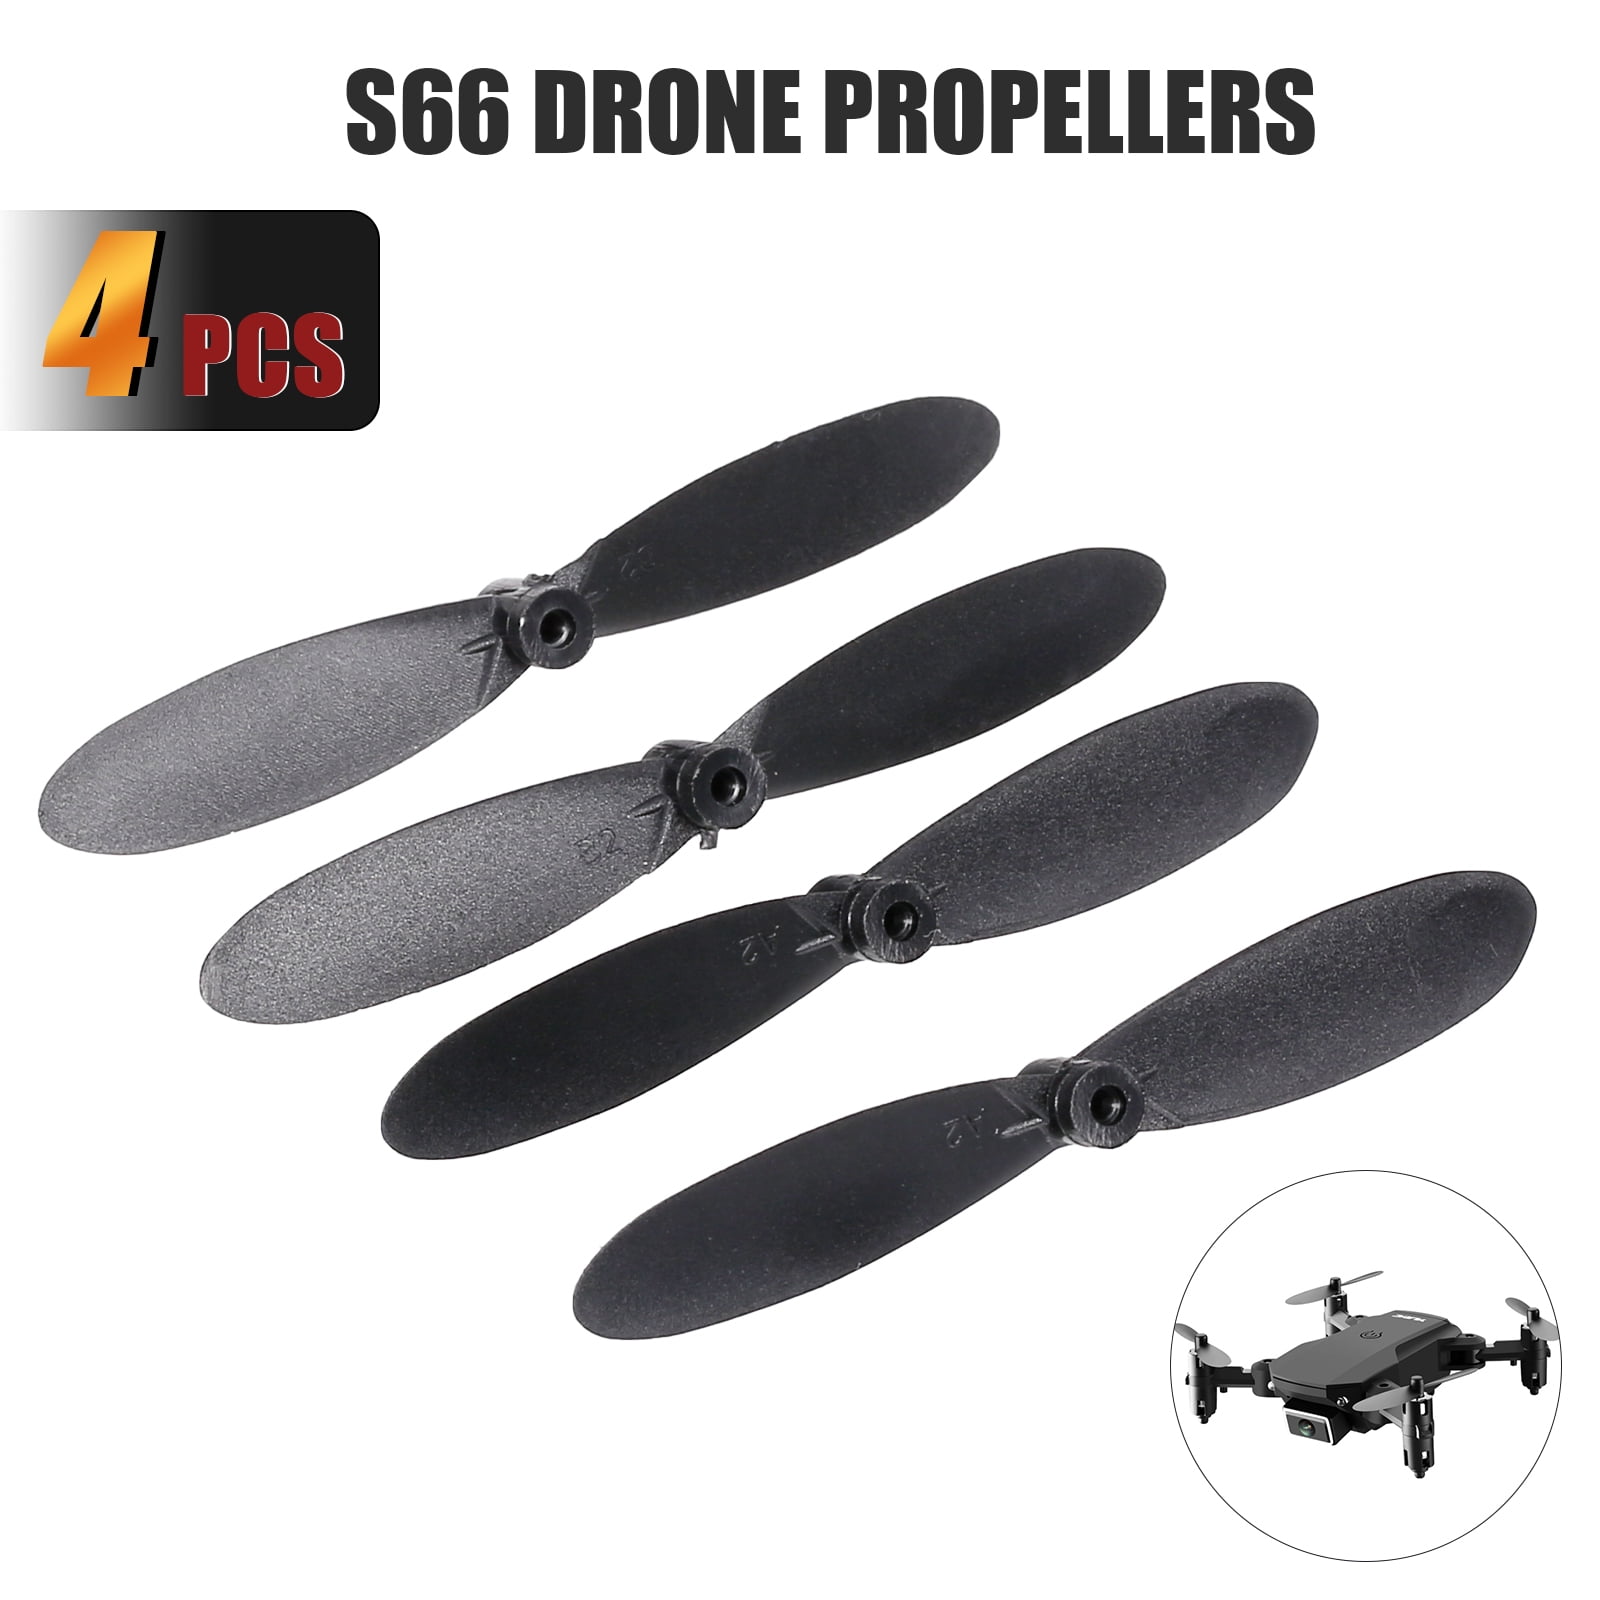 Details about   4PCS Propellers Blades Spare Parts for Syma X9 X9S Quadcopter Drone Flying Car 